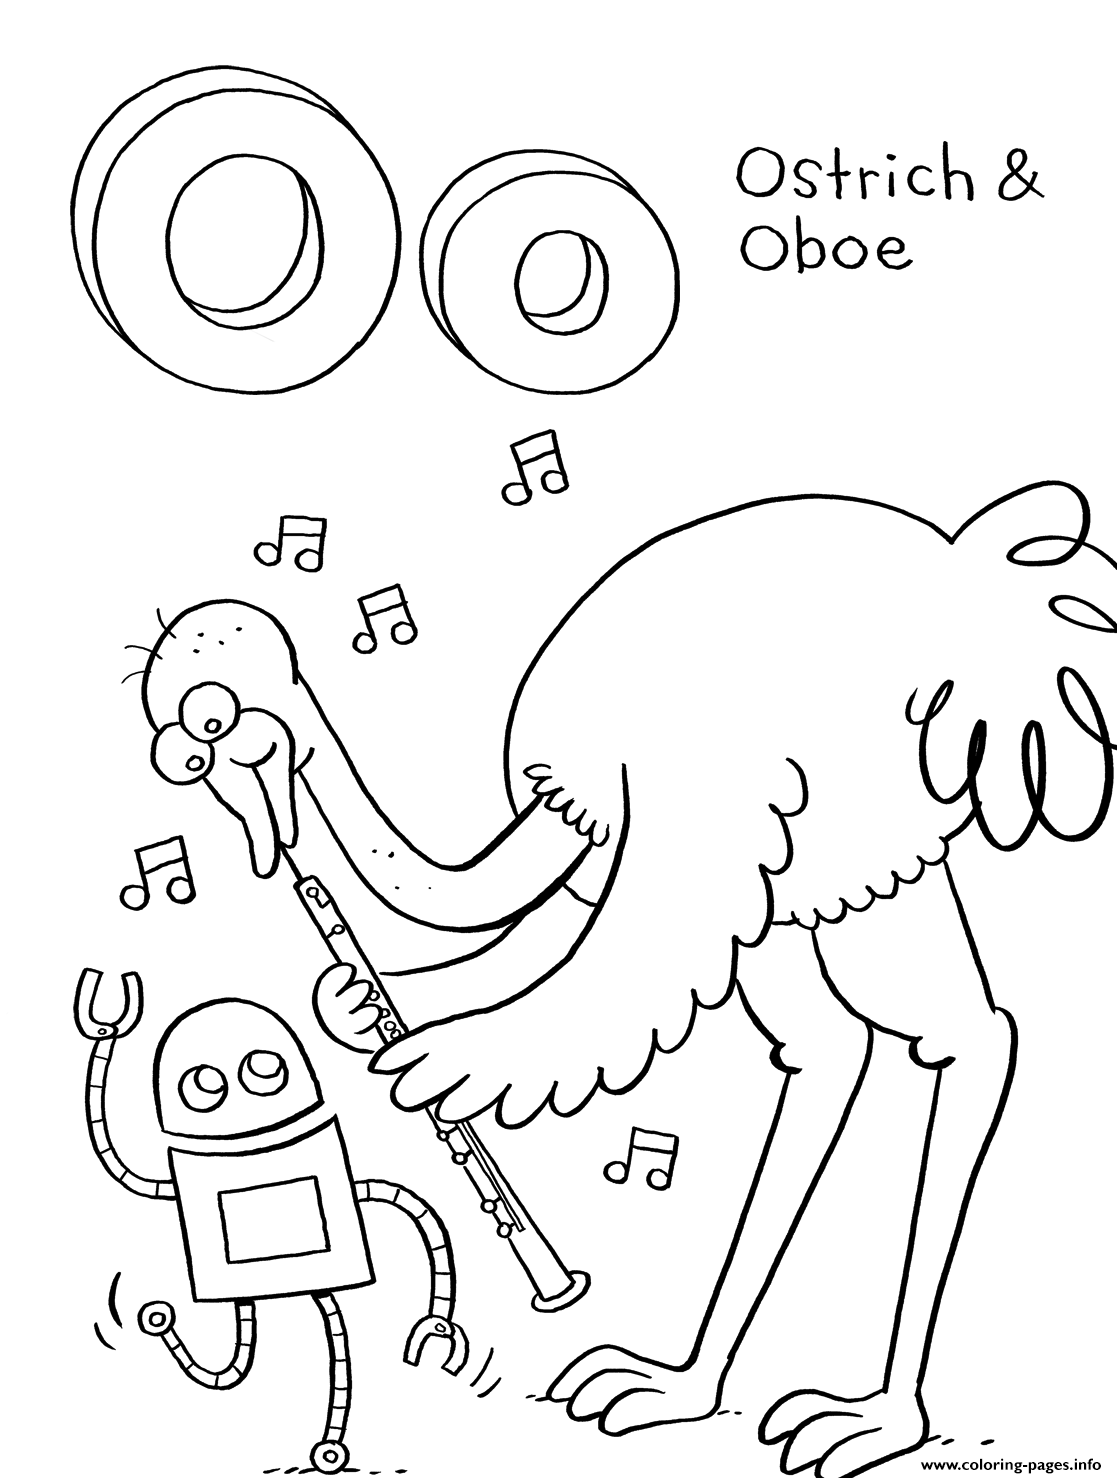 Download Oboe And Ostrich Alphabet S9bd1 Coloring Pages Printable